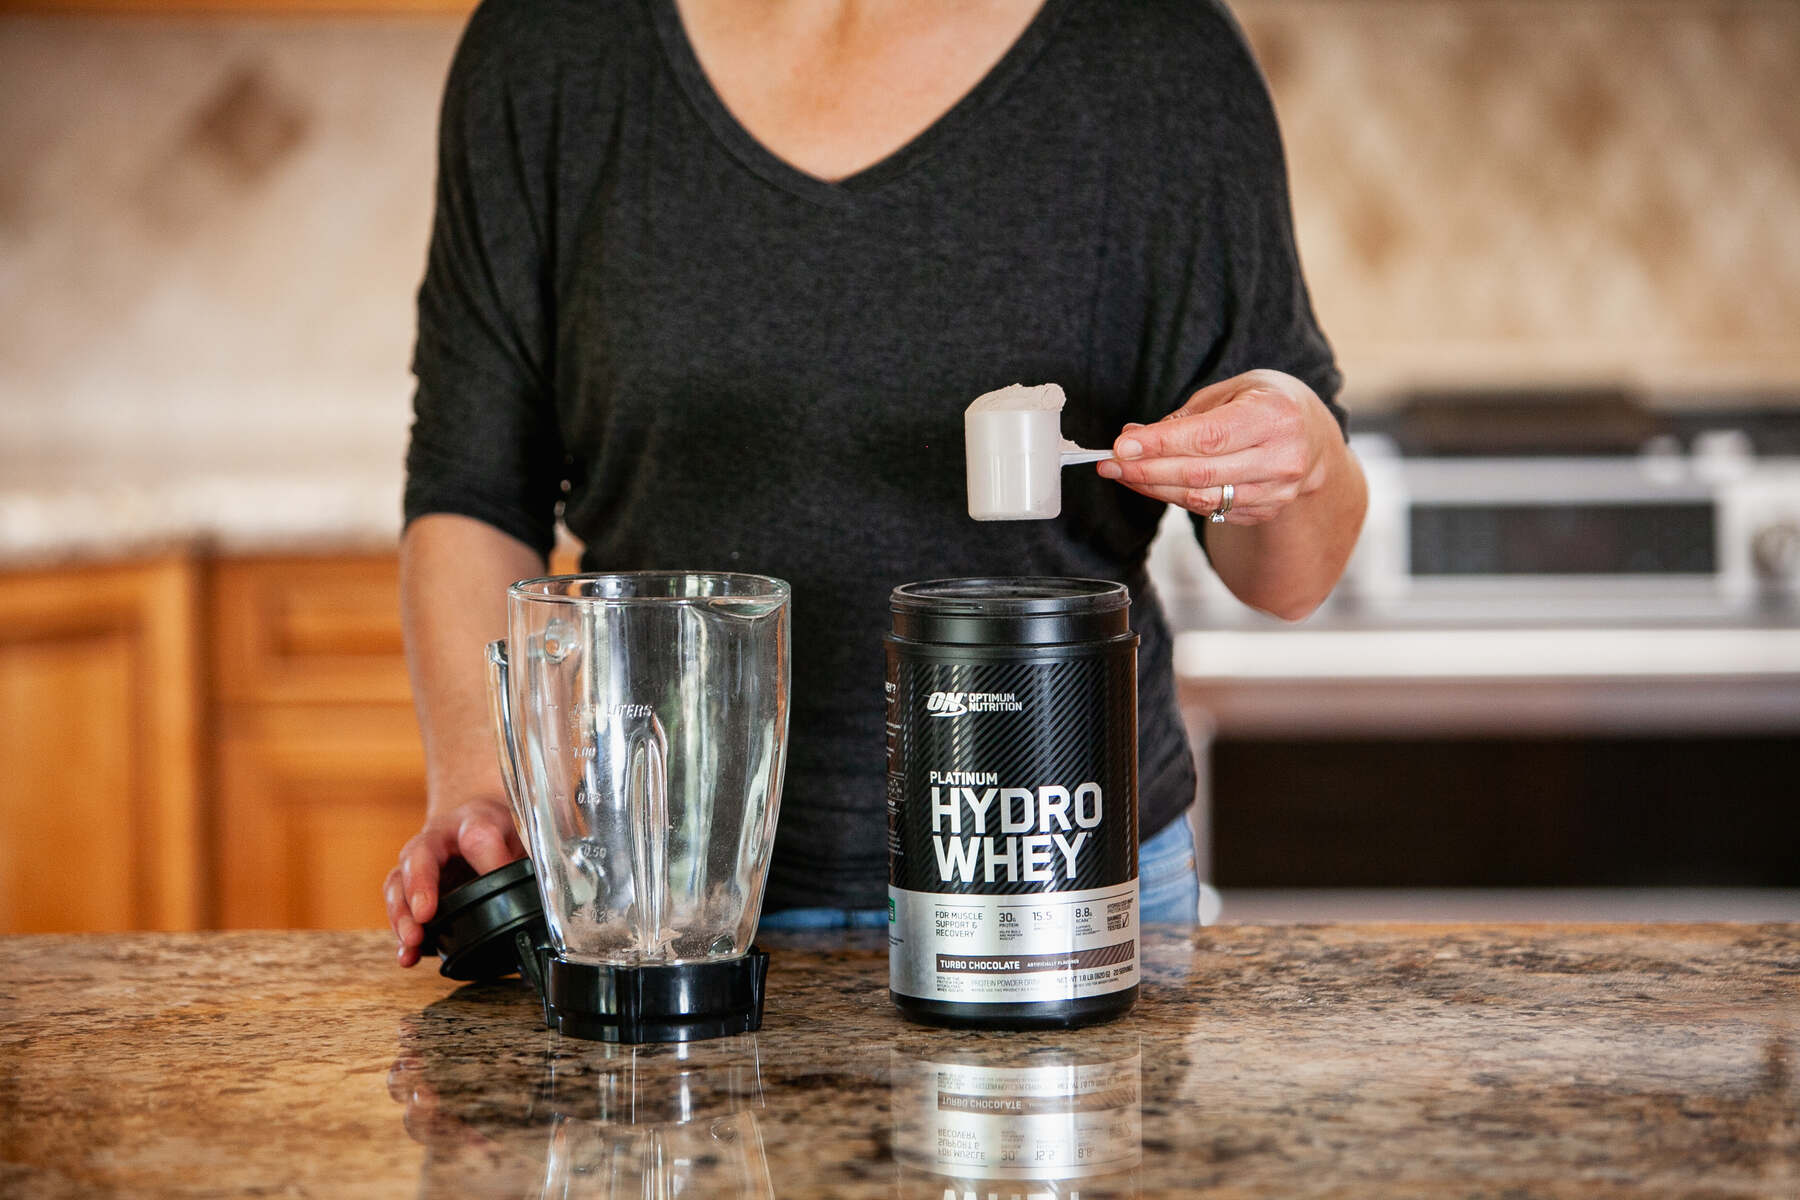 A woman scooping protein powder into a blender on a kitchen counter